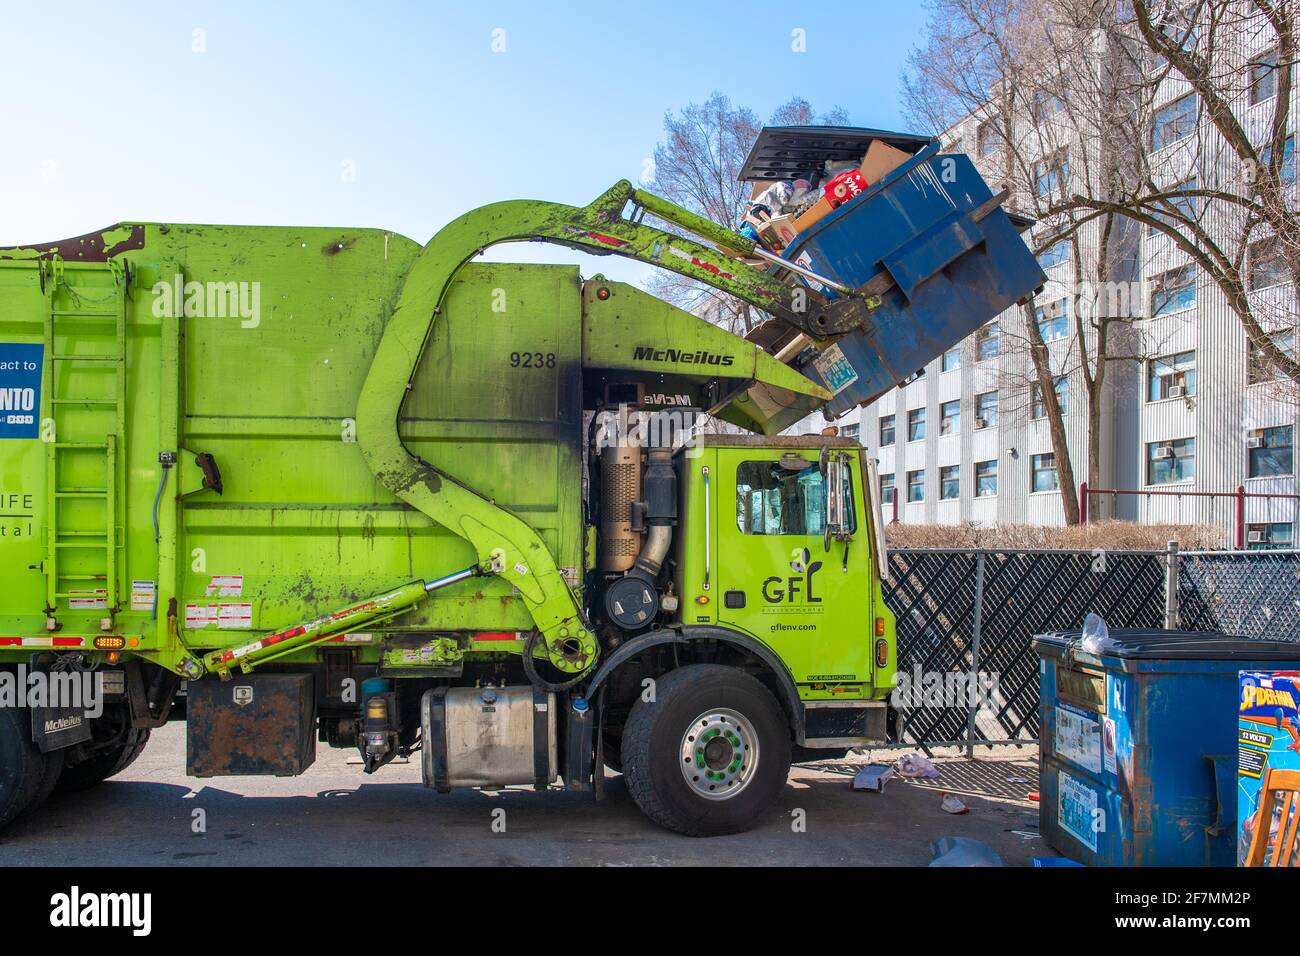 Recyclable garbage pick-up truck and service in the Toronto city. A GFL branded vehicle lifts a large metallic container from an apartment building Stock Photo